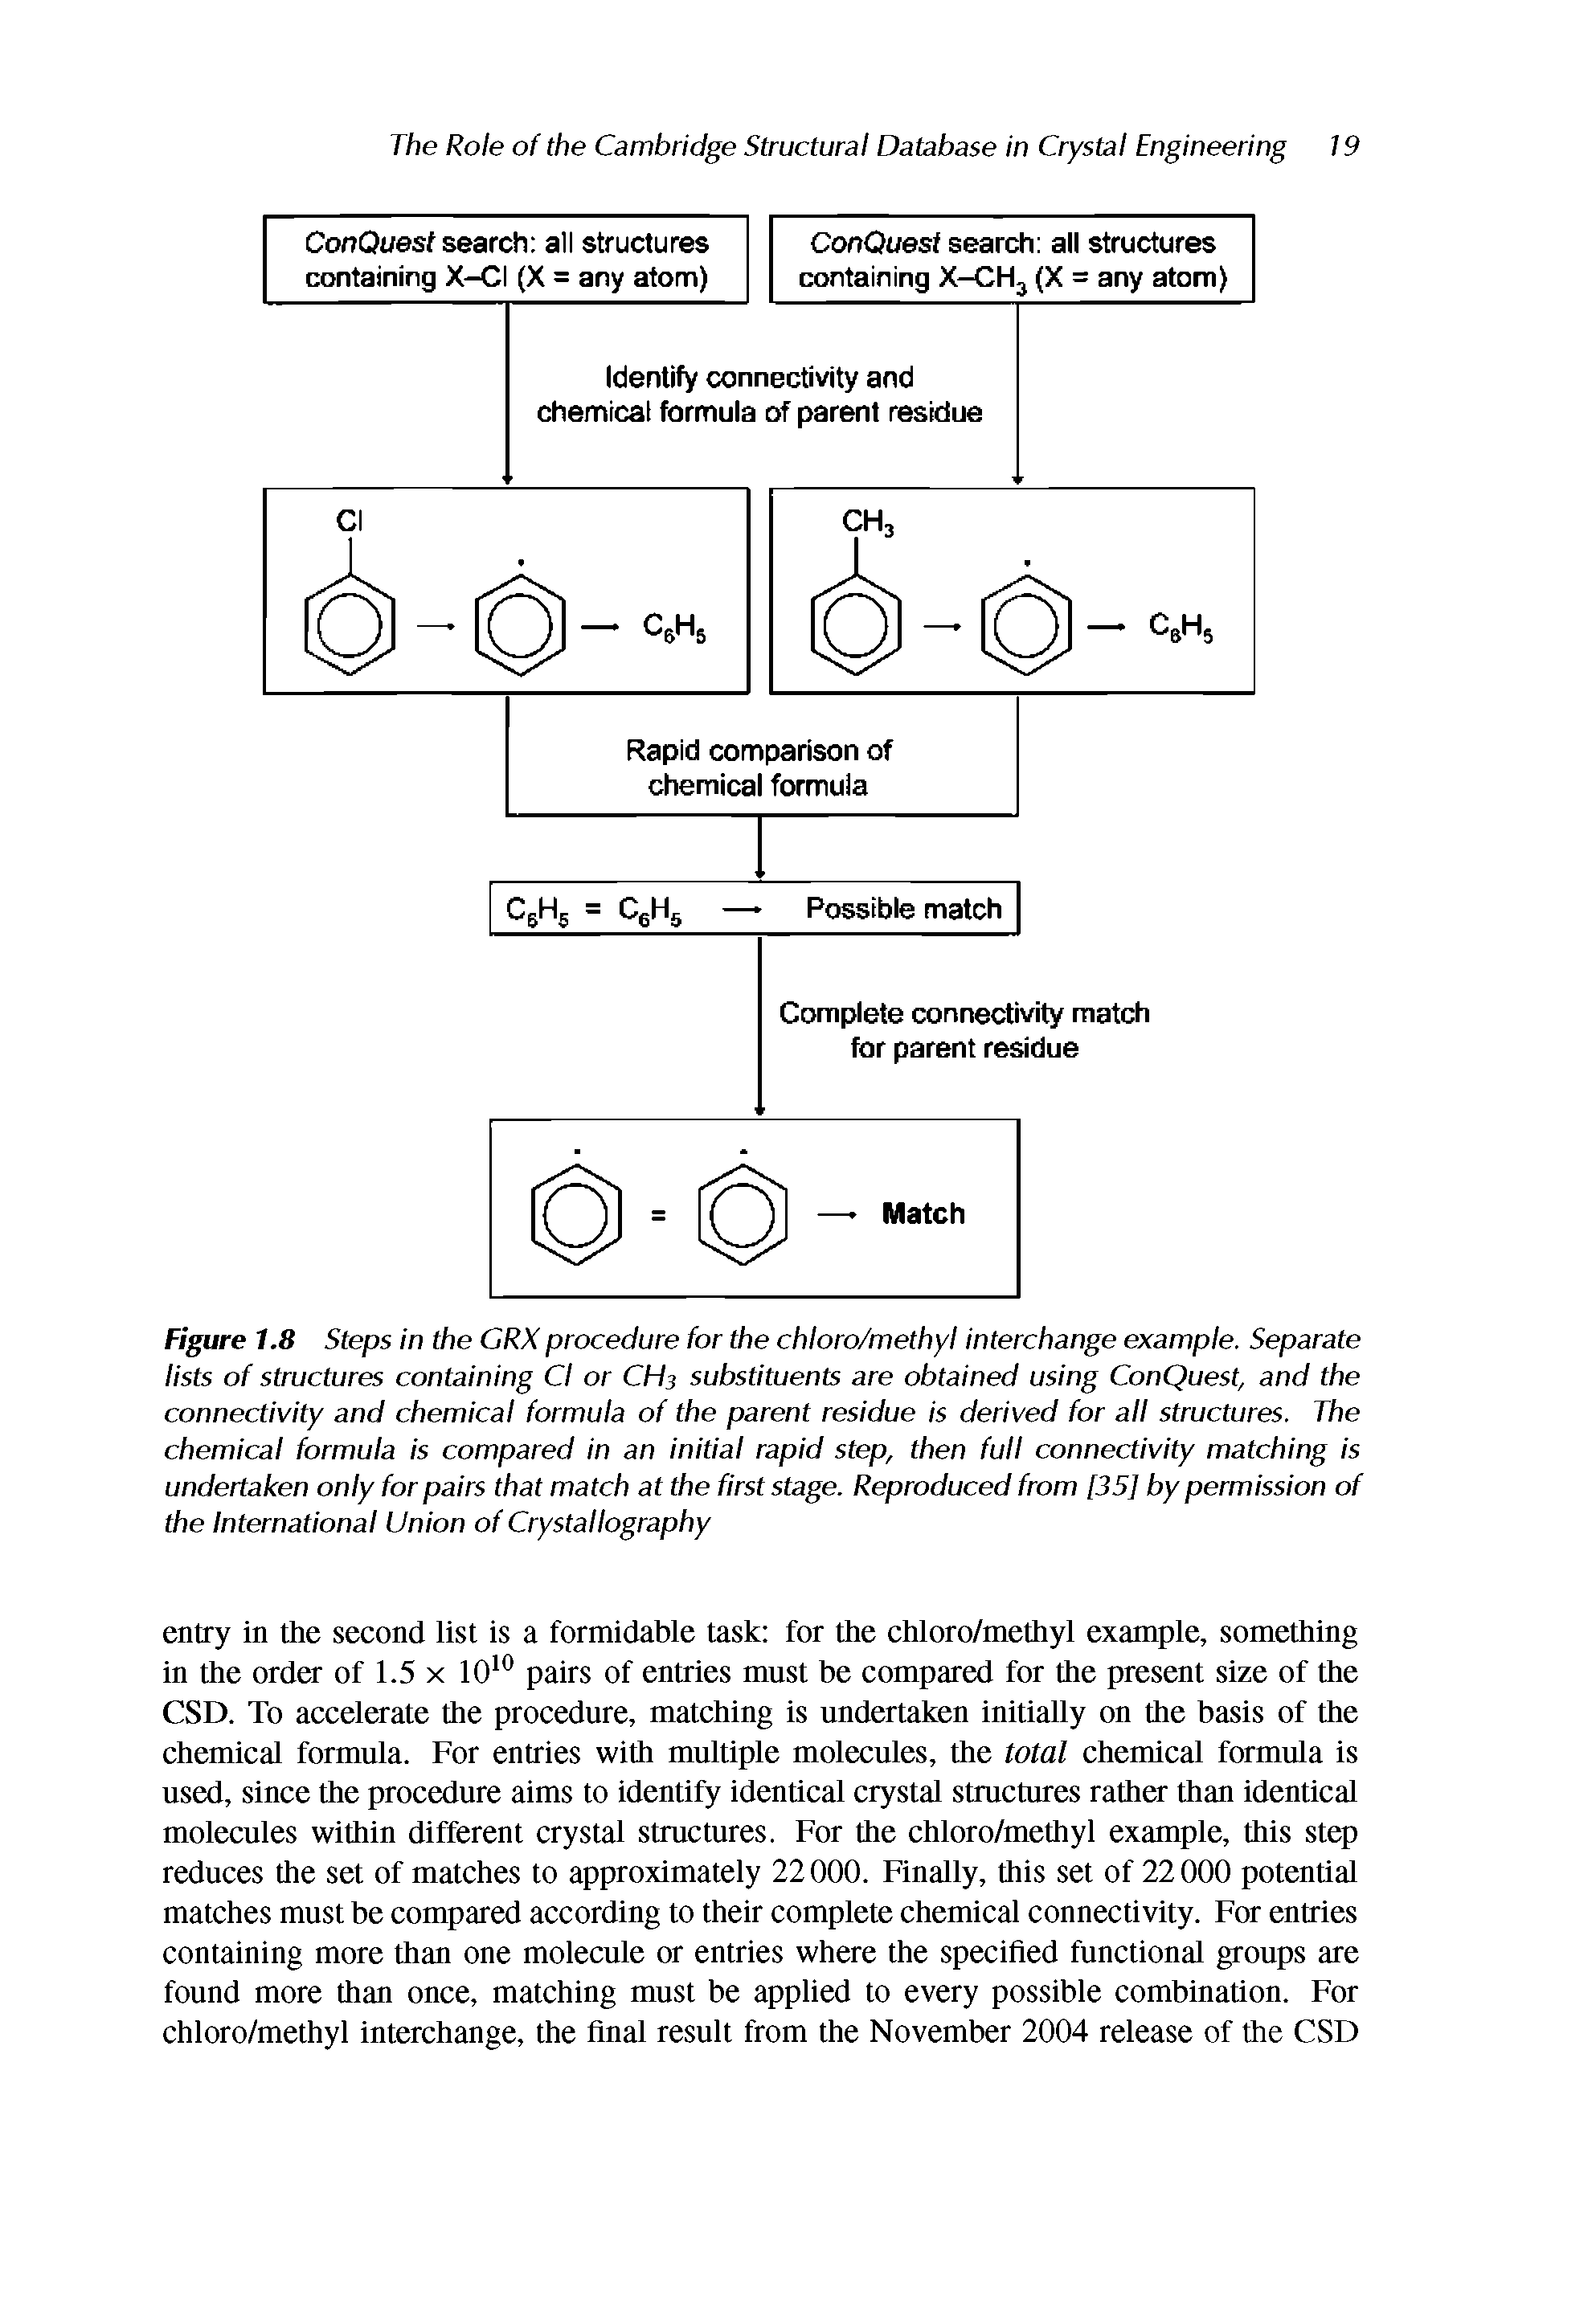 Figure 1.8 Steps in the GRX procedure for the chloro/methyl interchange example. Separate lists of structures containing Cl or CHj substituents are obtained using ConQuest, and the connectivity and chemical formula of the parent residue is derived for all structures. The chemical formula is compared in an initial rapid step, then full connectivity matching is undertaken only for pairs that match at the first stage. Reproduced from [35] by permission of the International Union of Crystallography...